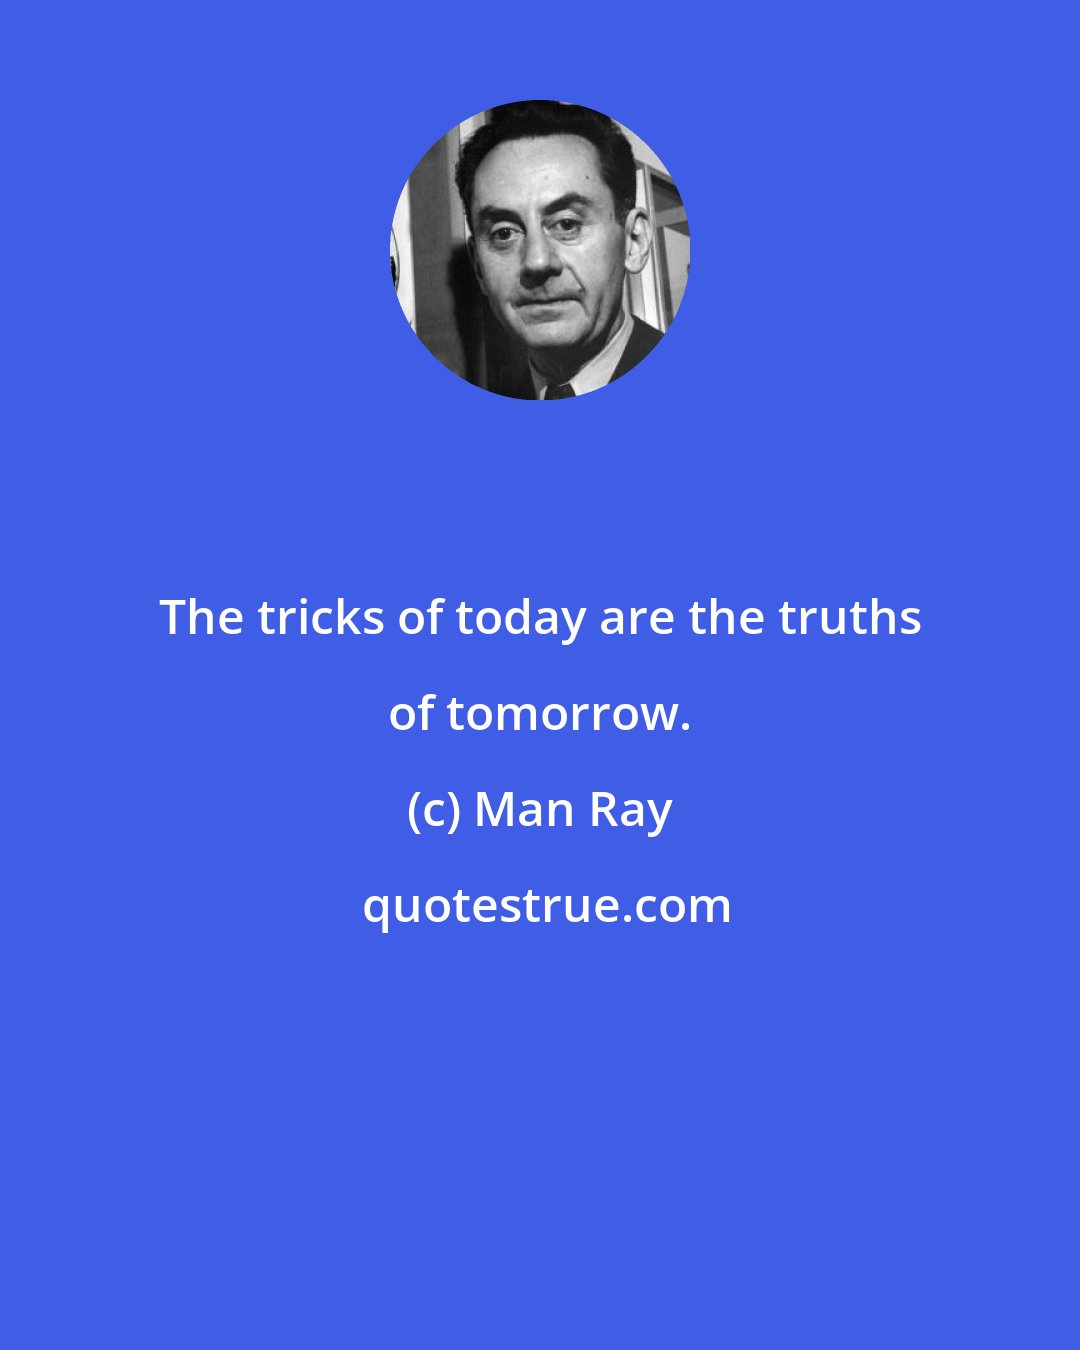 Man Ray: The tricks of today are the truths of tomorrow.